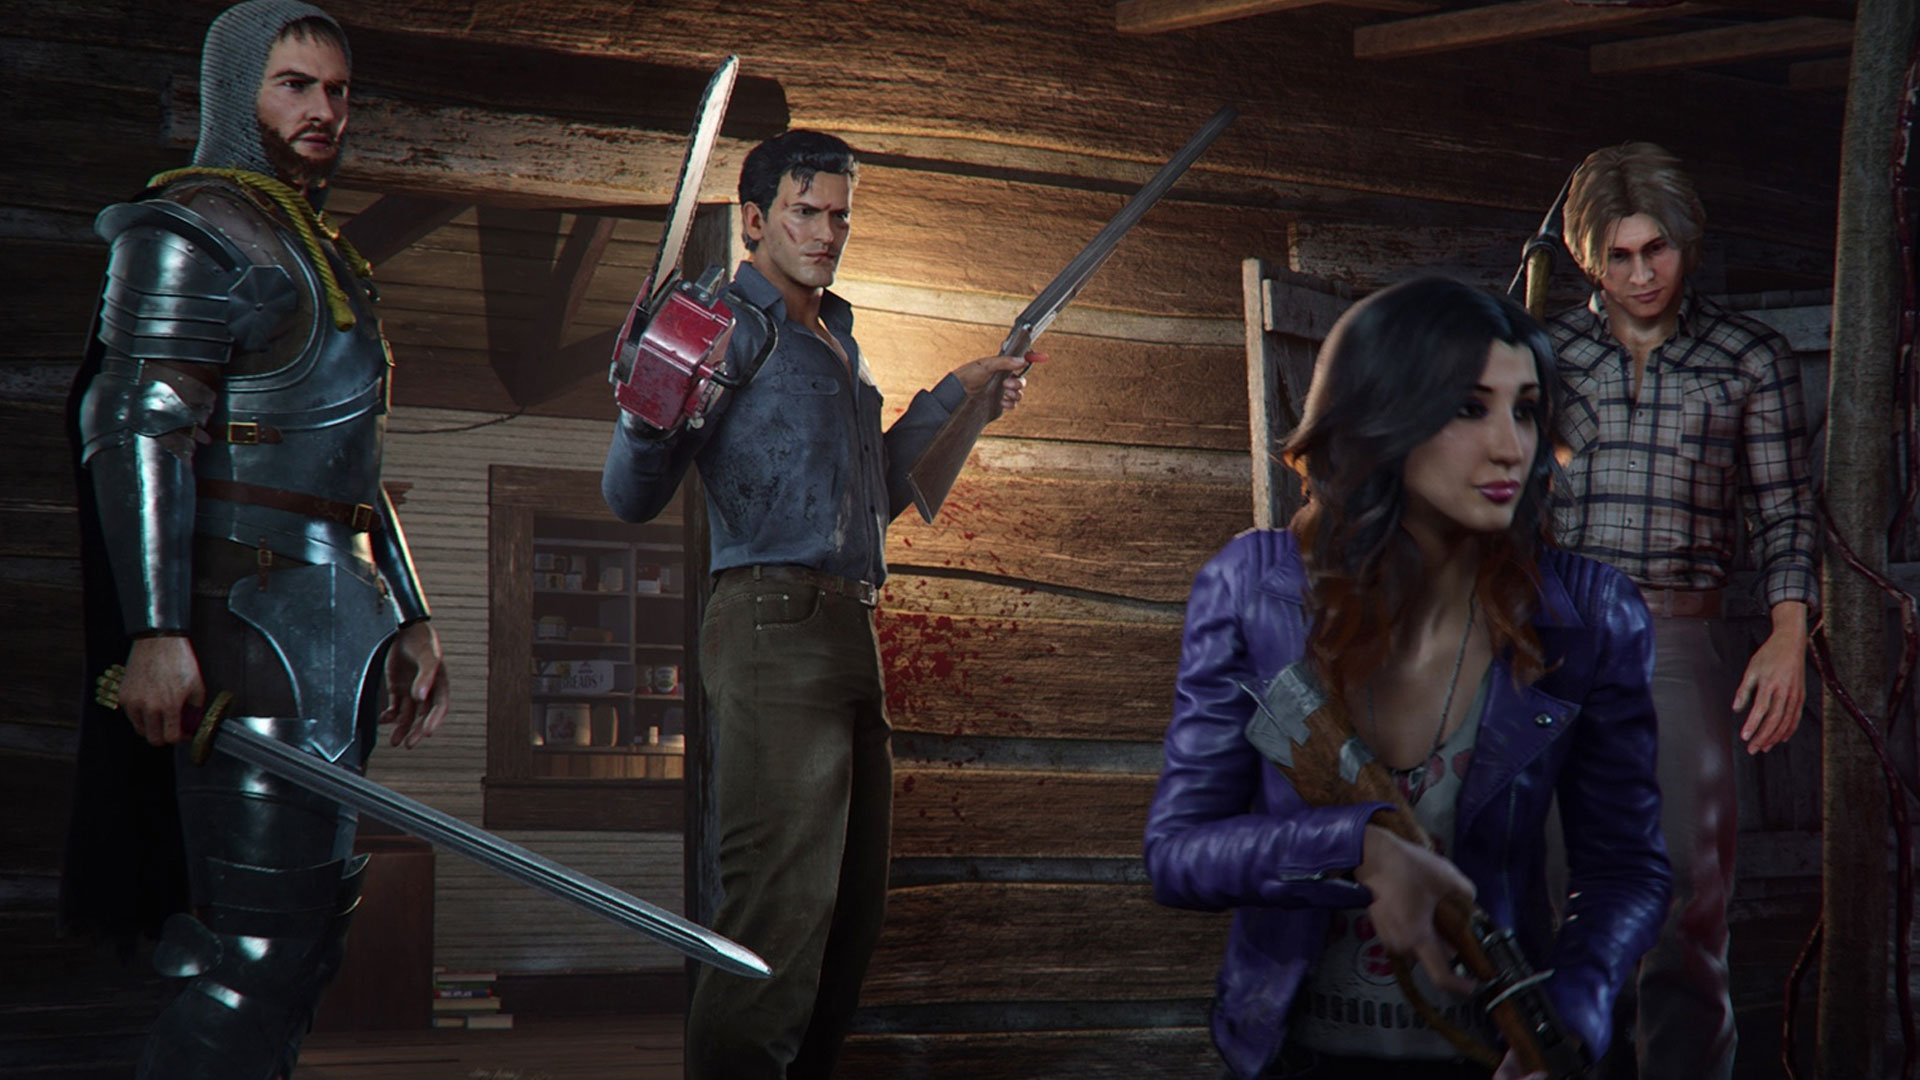 Evil Dead: The Game' leverages its film and TV roots to great